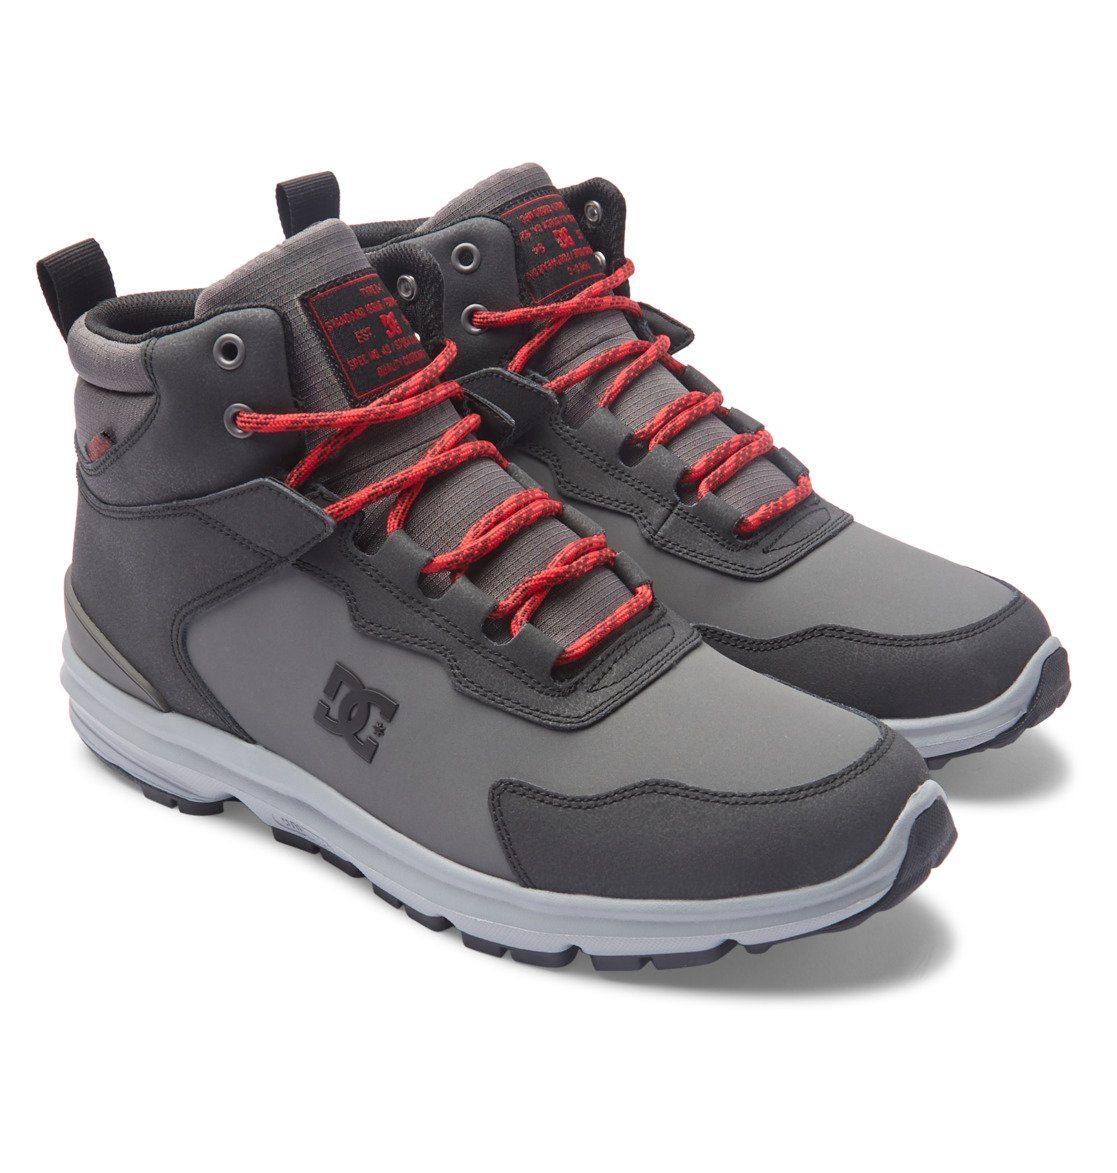 Grey/Black/Red Stiefel Shoes DC Mutiny